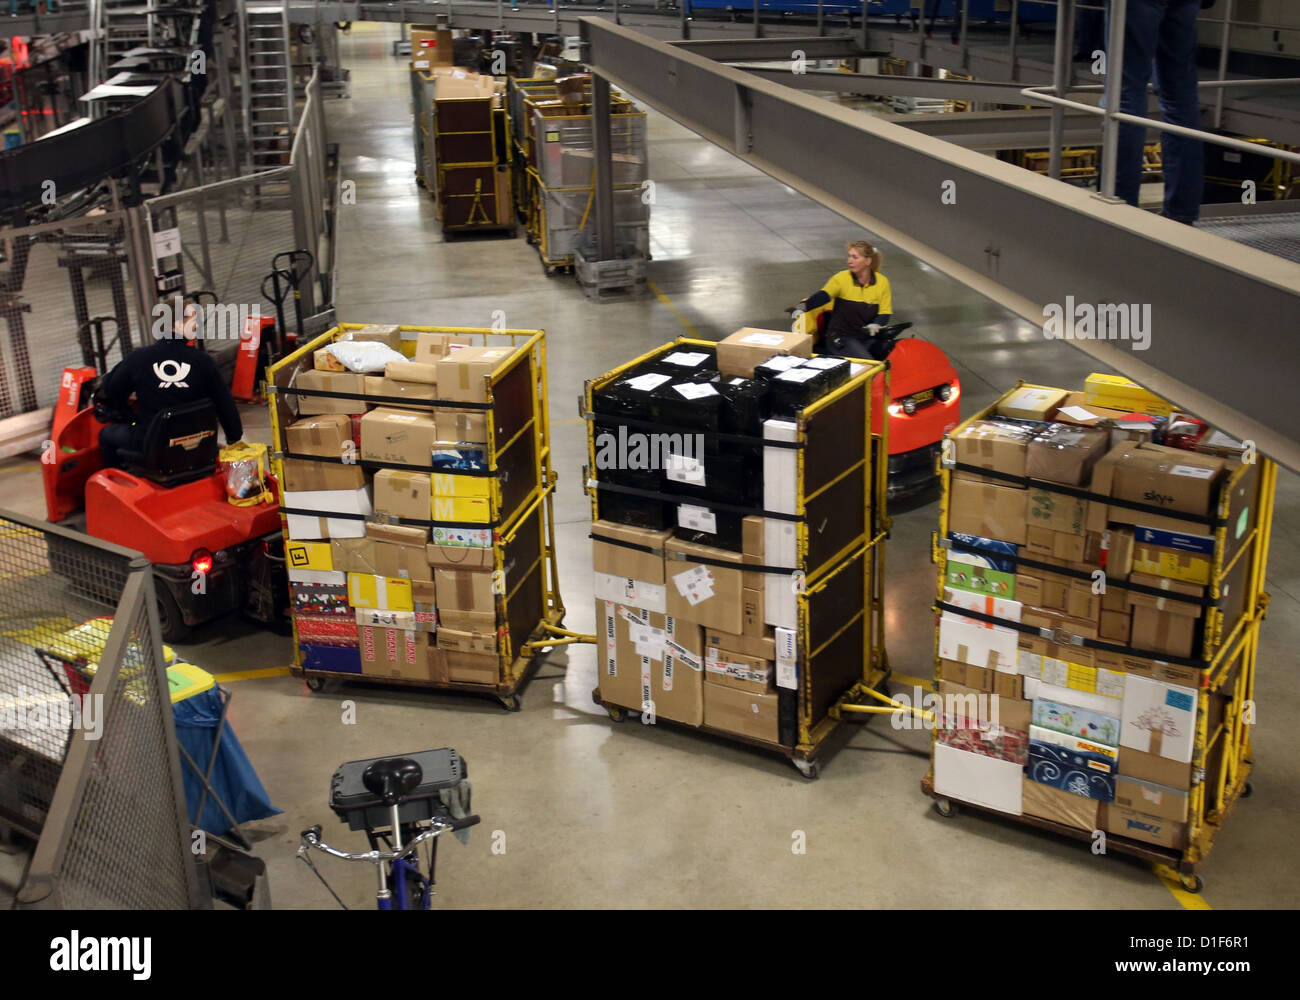 Containers with packages are brought from the trucks to the area where they will be sorted at the parcel sorting center of Deutsche Post DHL in Neustrelitz, Germany, 17 December 2012. Up to 20,000 parcels are sorted in an hour. Since November, the traffic doubled, and six million packages are sorted in total. Nationwide, Deutsche Post DHL expects a record in the number of packages delivered in the Christmas period. Photo: Bernd Wüstneck Stock Photo